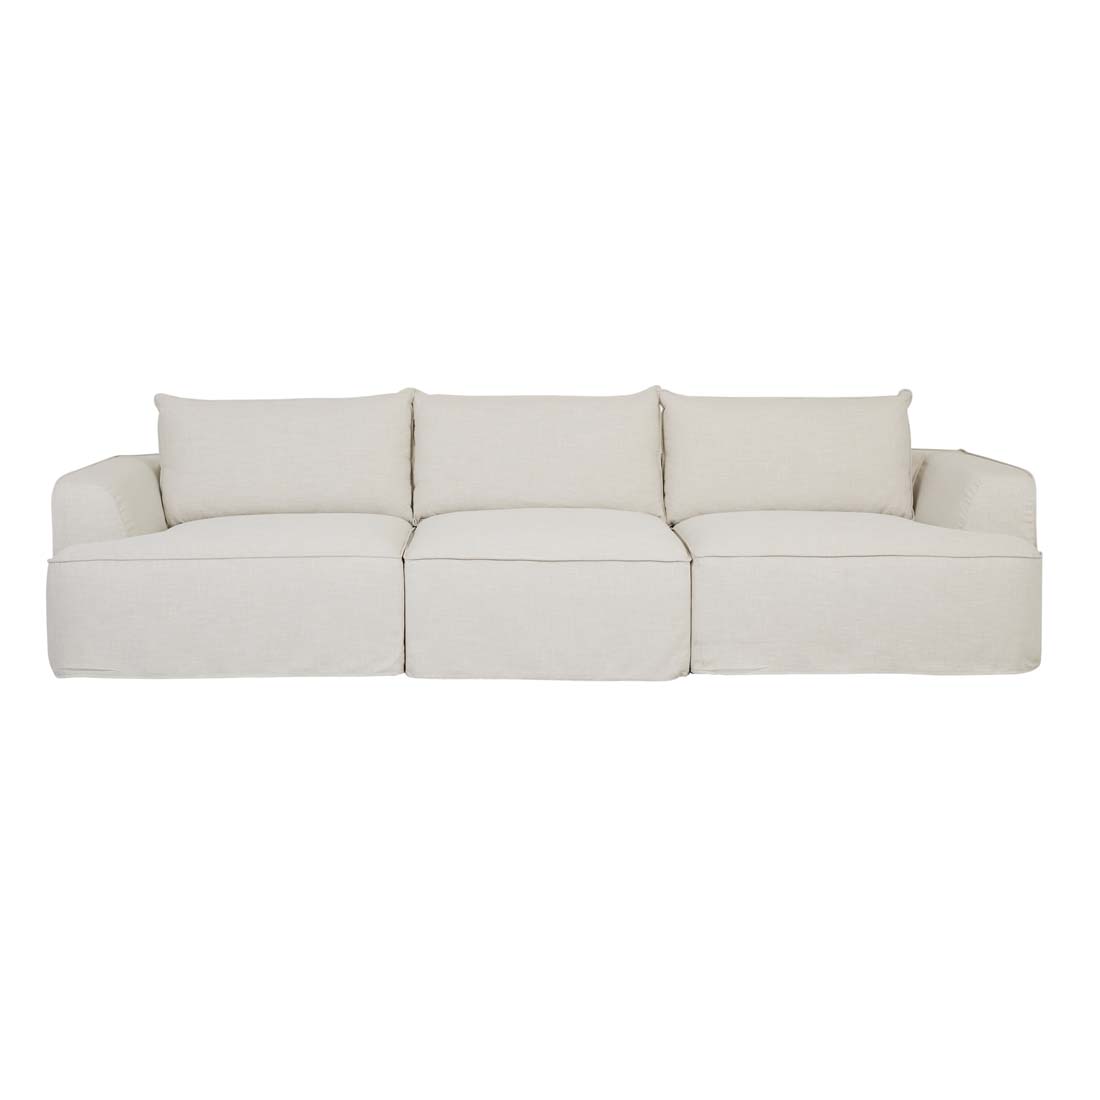 Airlie Slouch 1 Seater Centre Sofa image 2